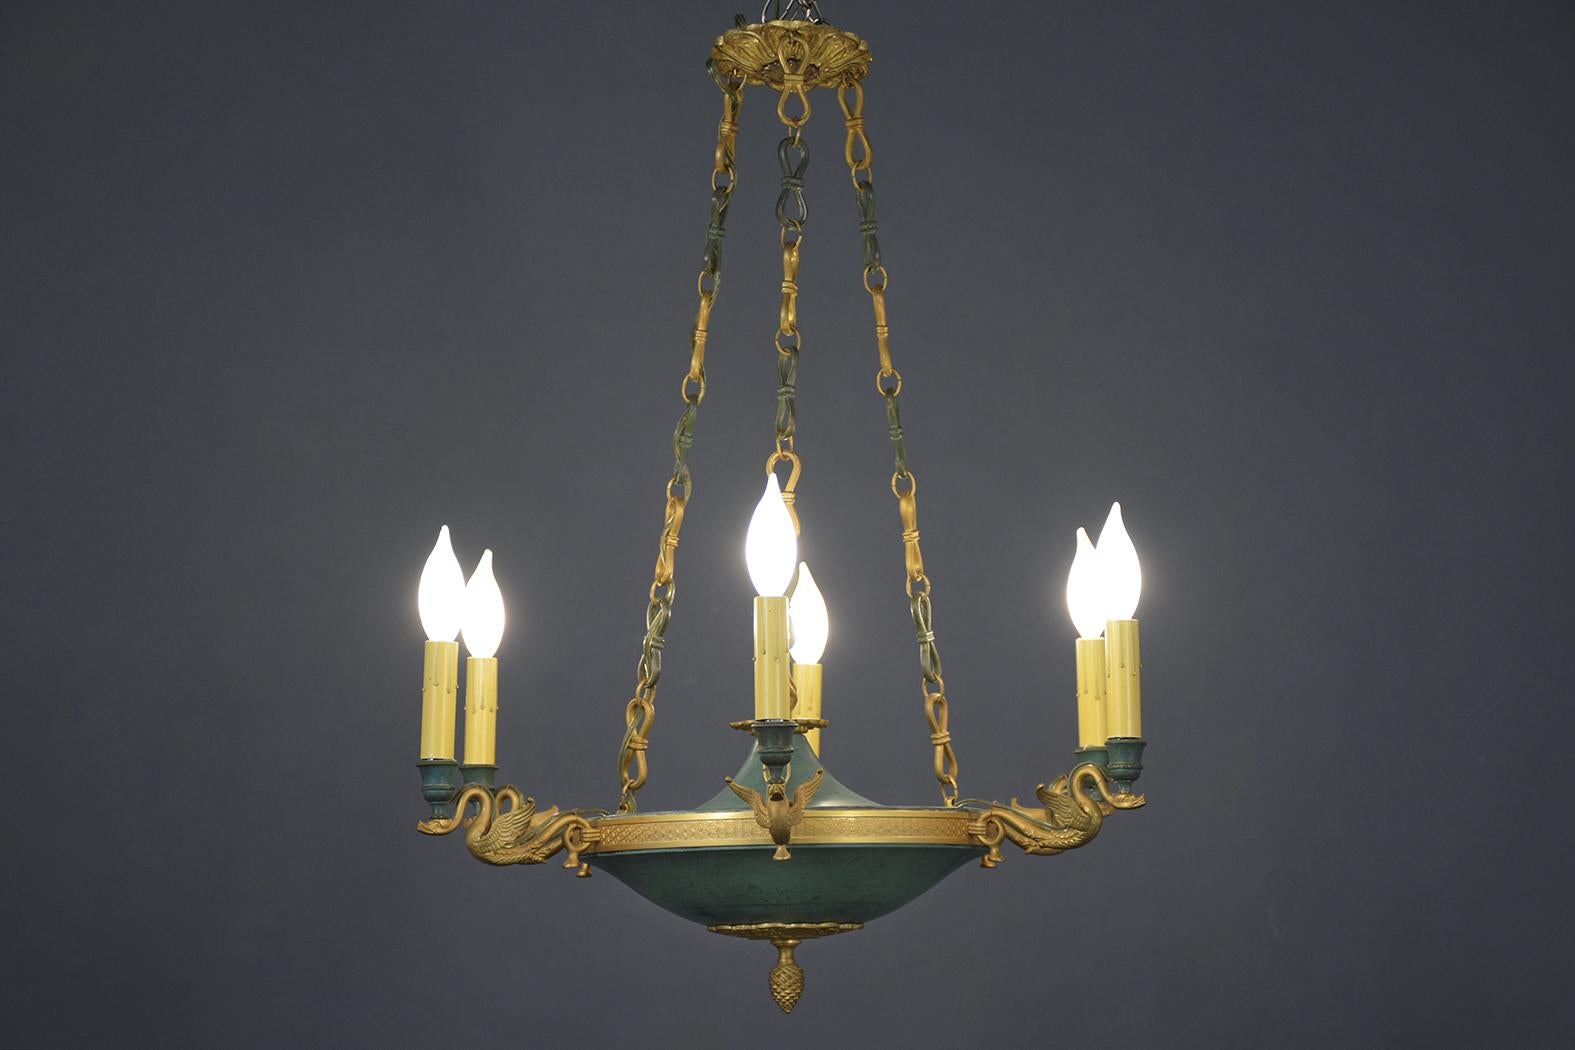 A remarkable antique empire chandelier crafted out of bronze is in good condition and features a gold-plated finish. It comes with a combination of French pale green paint color with a beautiful patina finish, six lights holding by swan motifs, has